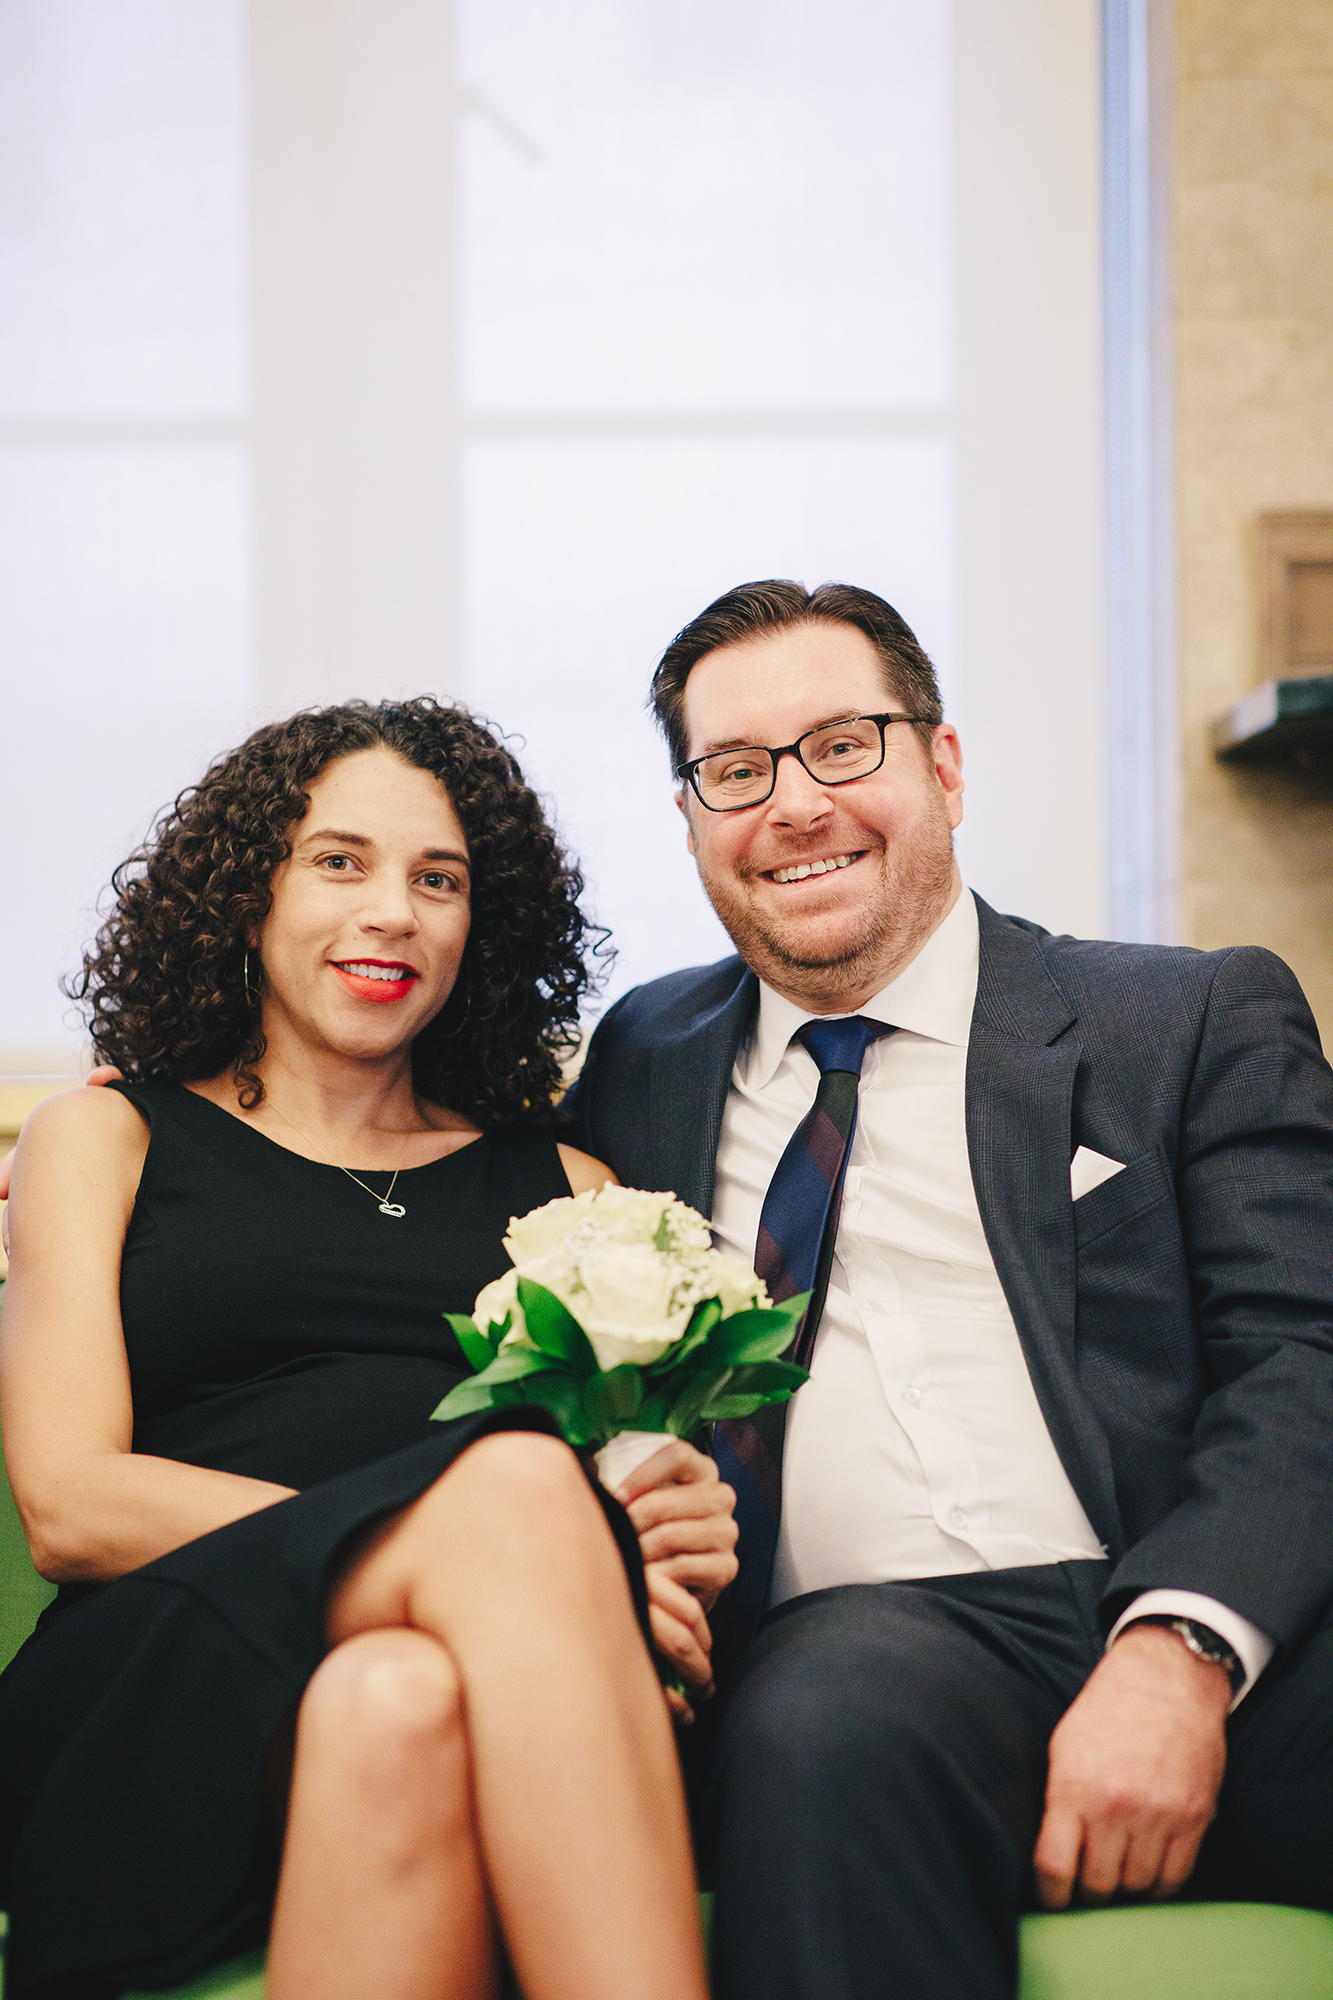 Gorgeous City Hall Elopement in New York City